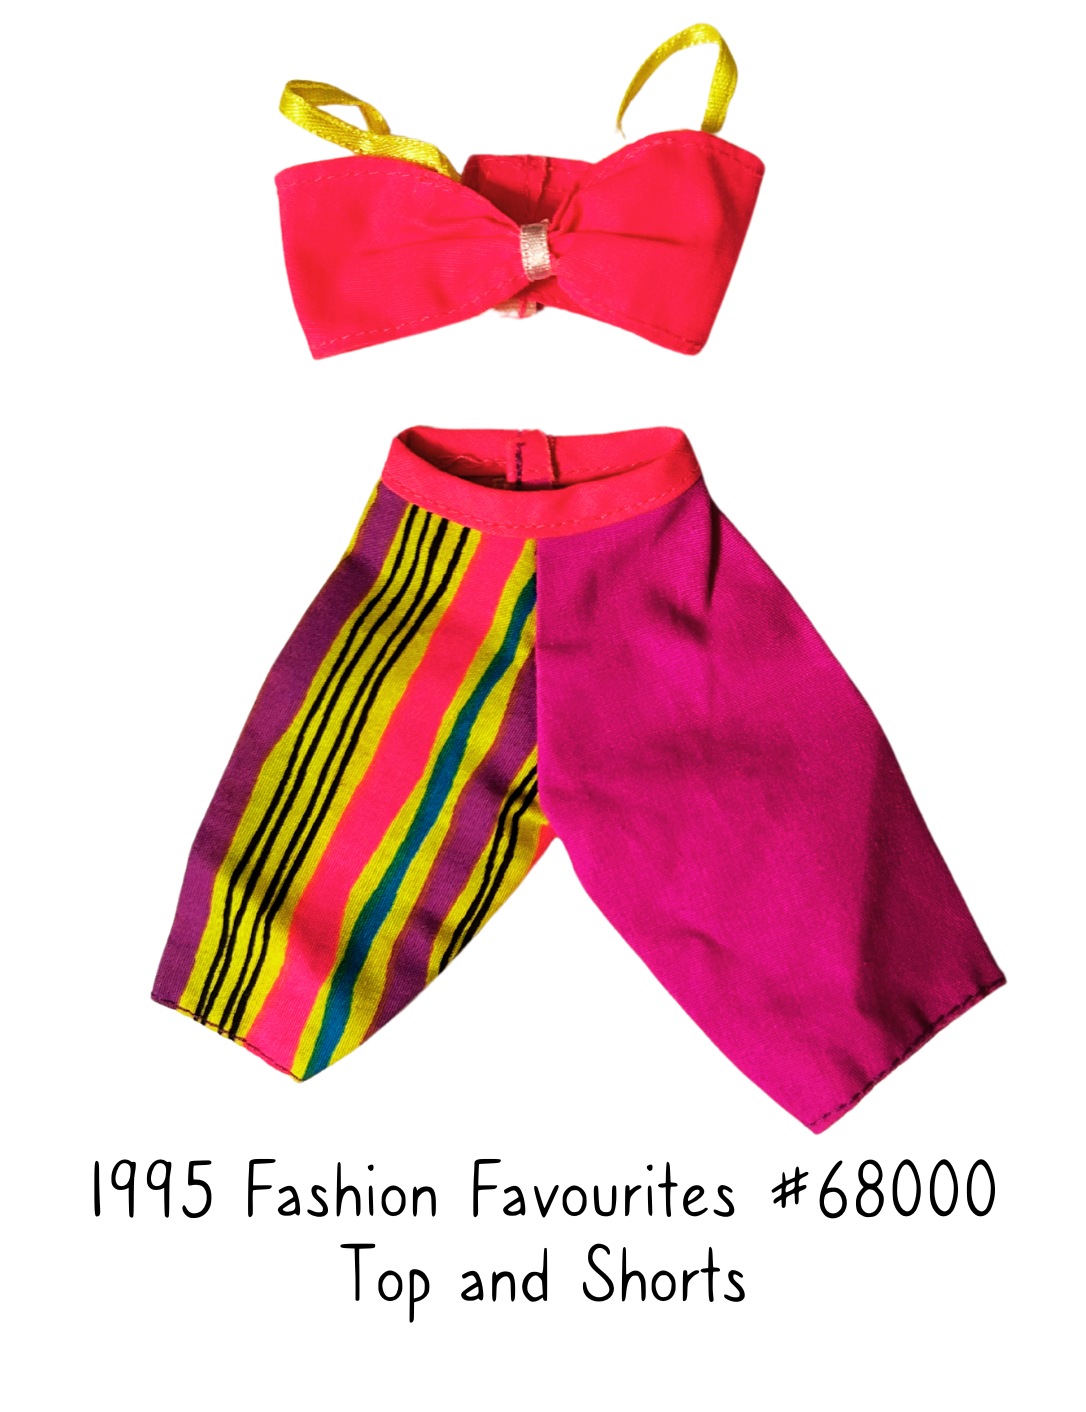 1995 Barbie Fashion Favourites #68000 Top and Shorts